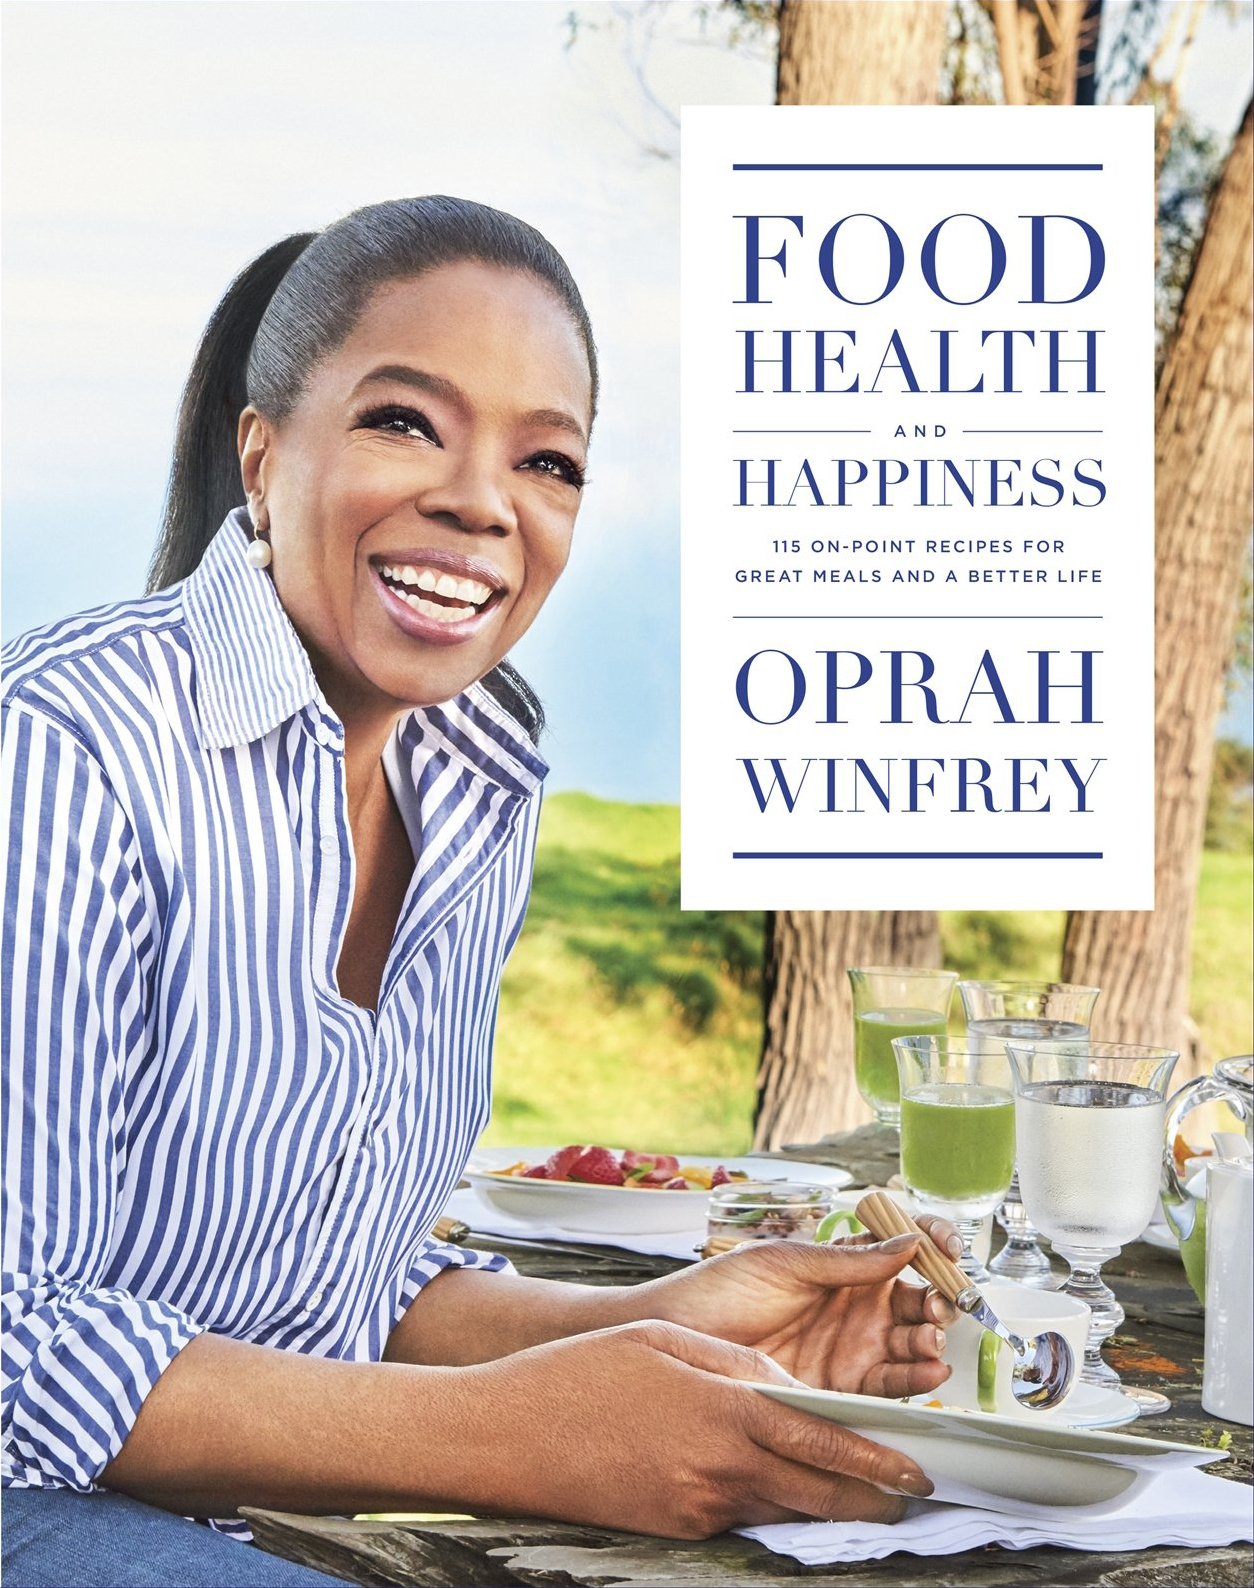 The 1 Chicken Recipe You'll Want to Make From Oprah's New Cookbook